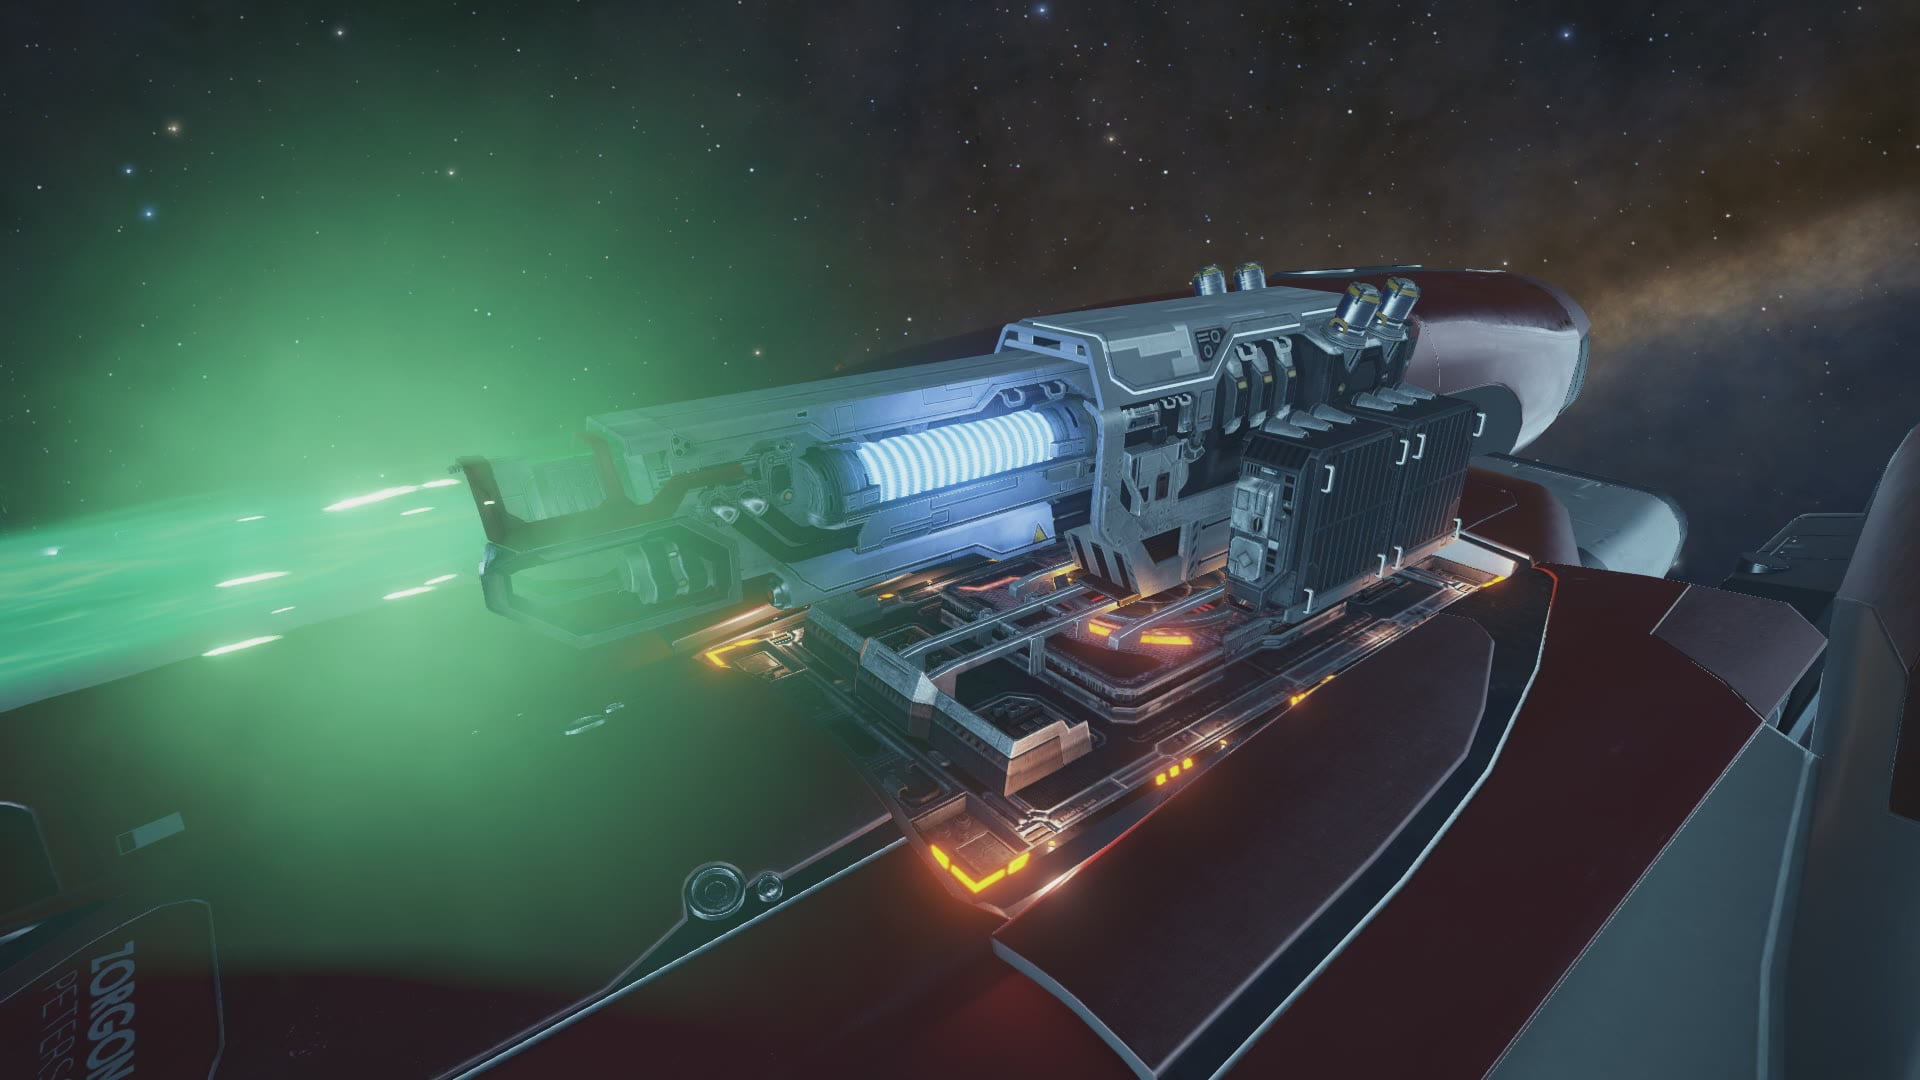 Lasers, Plasma And Multi-Cannons - A Look At Elite Dangerous